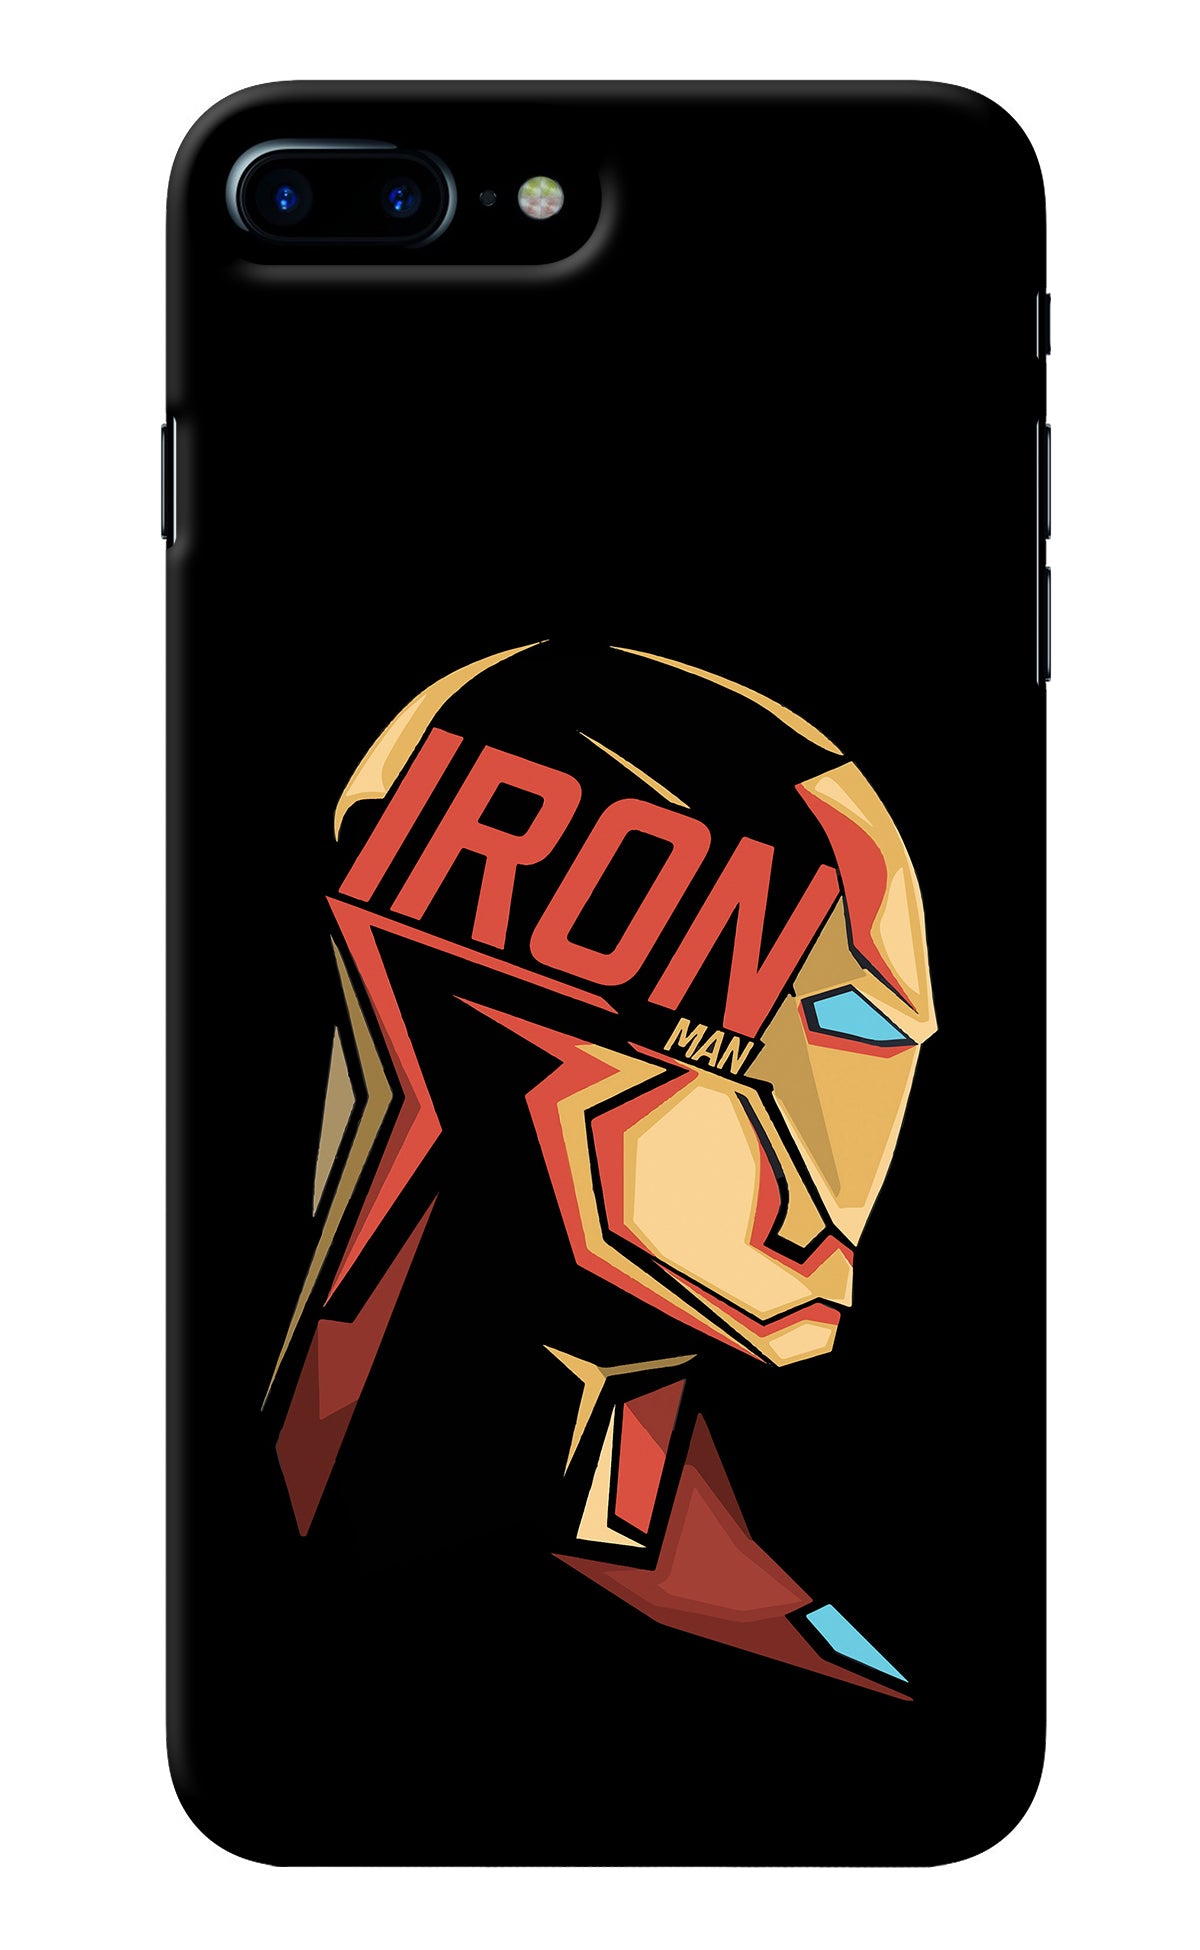 IronMan iPhone 8 Plus Back Cover